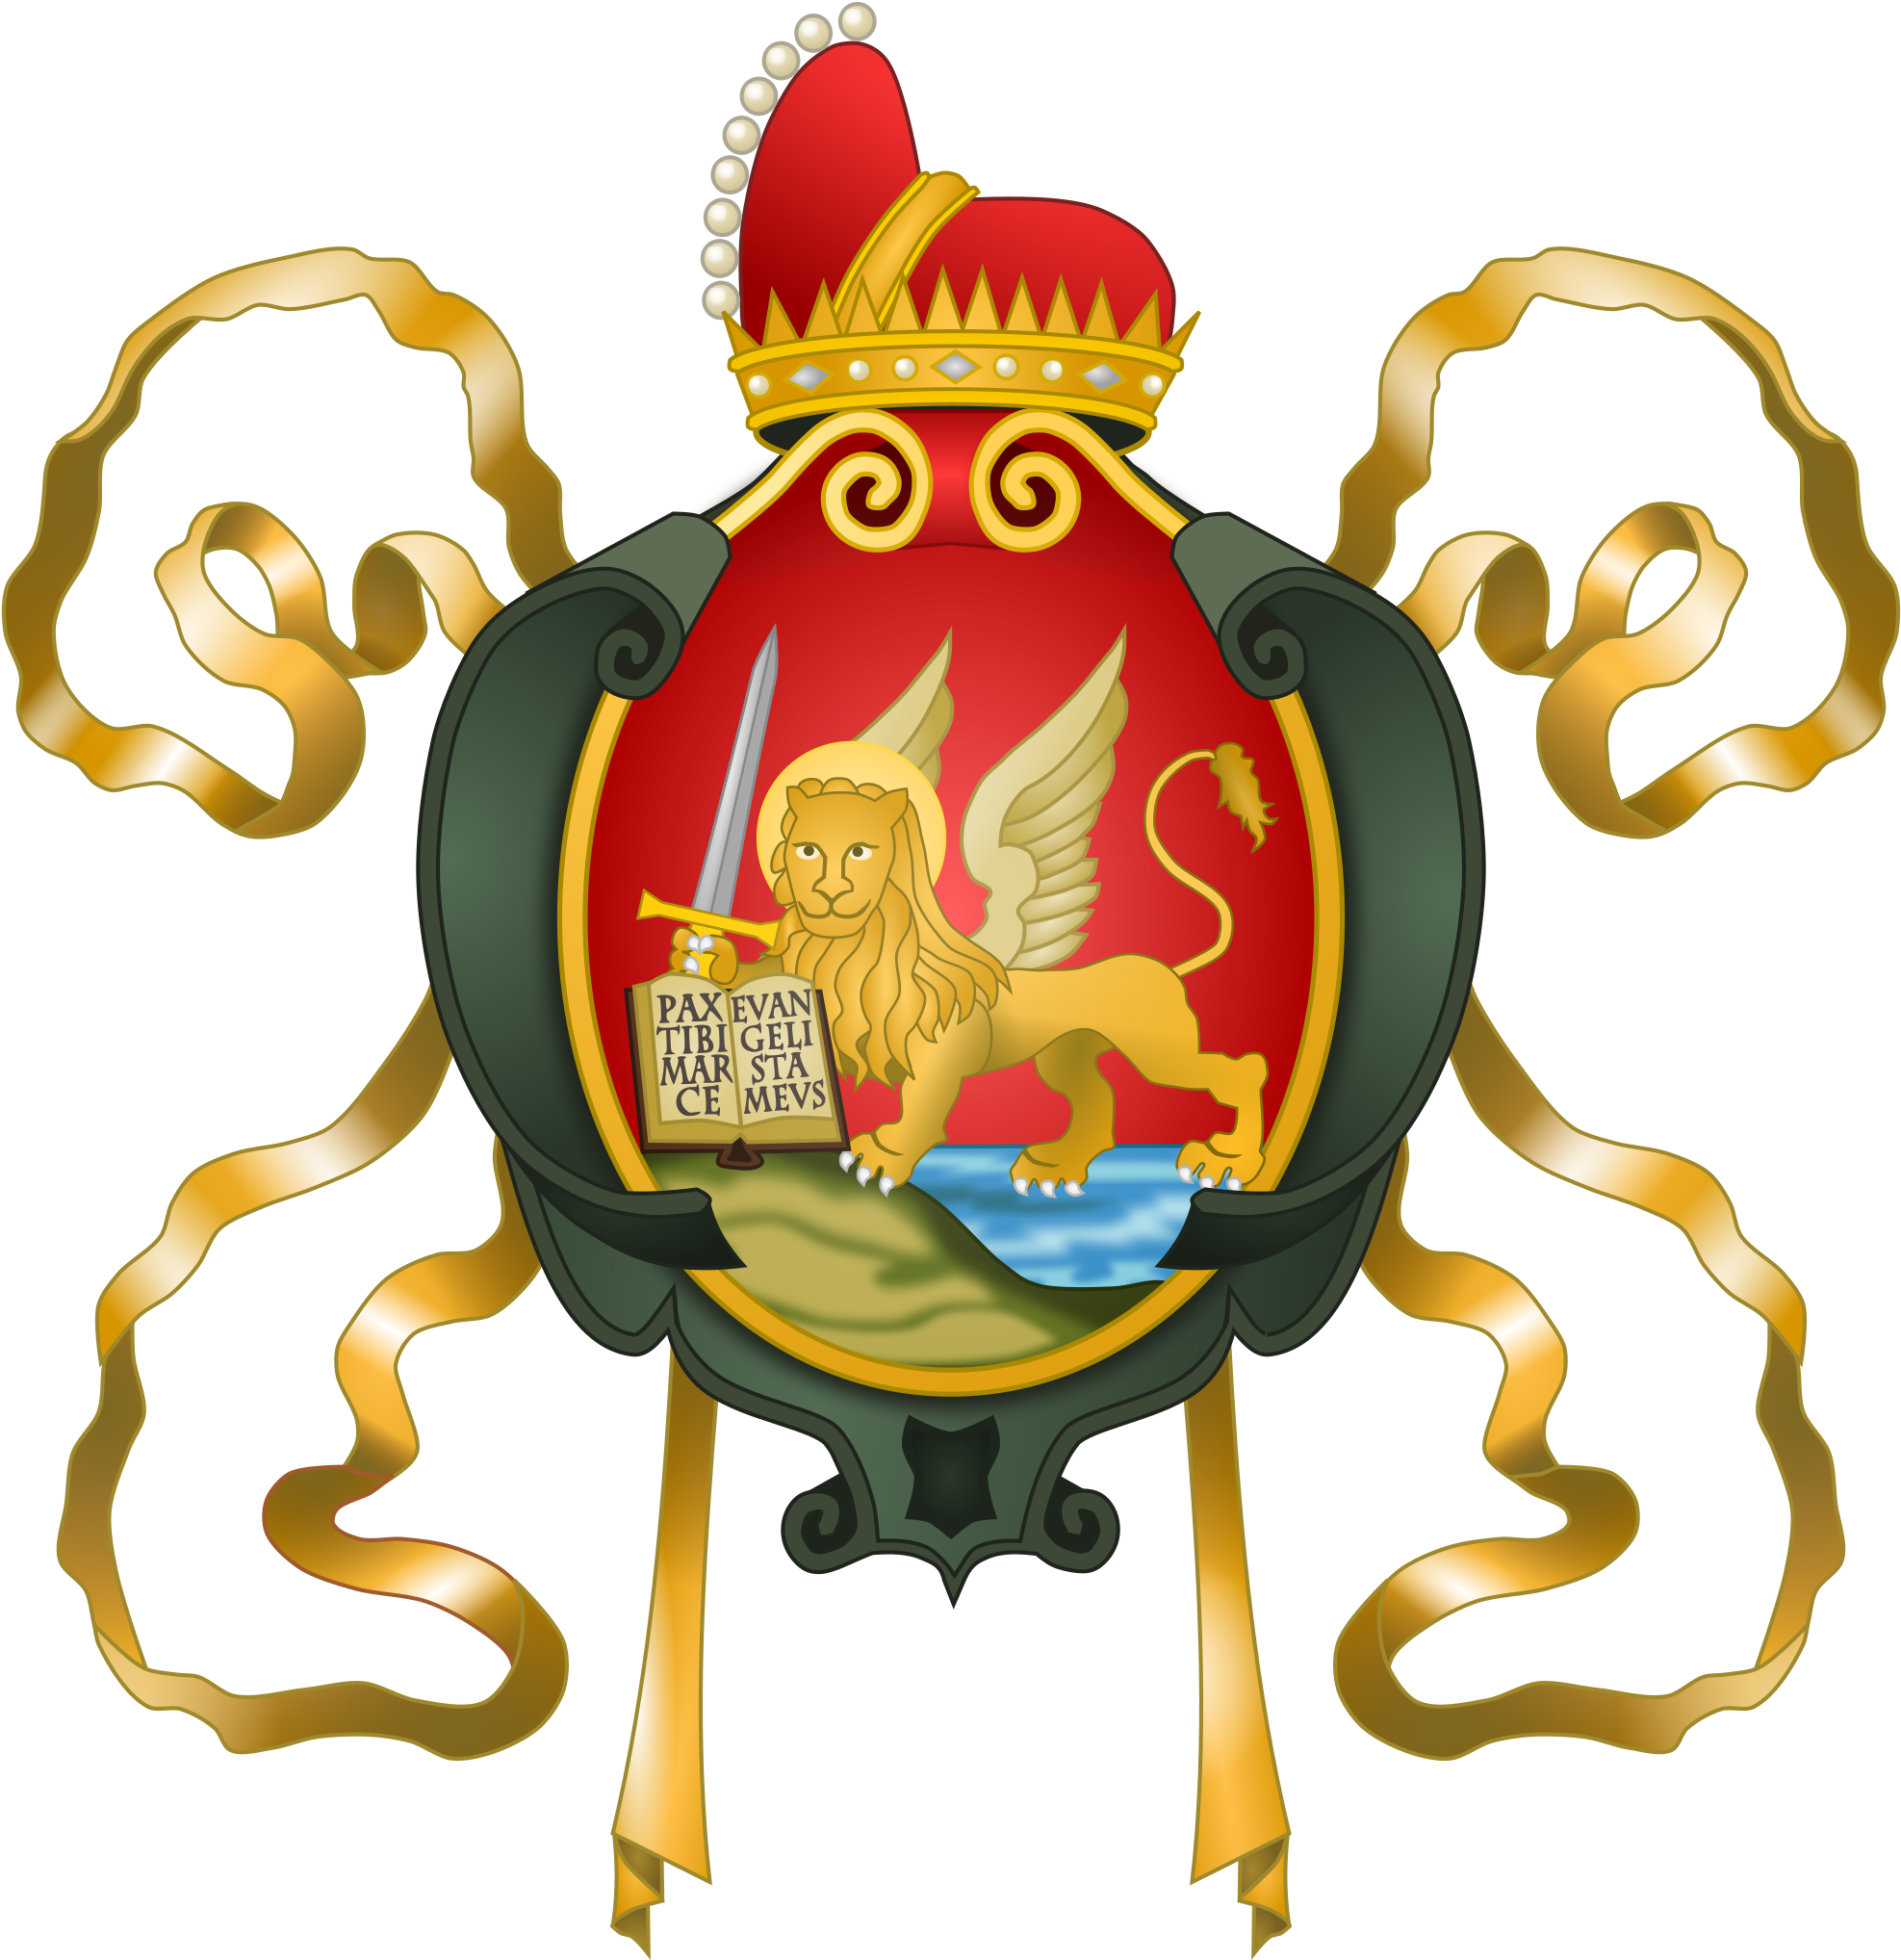 Image - Coat Of Arms Of Venice (2000x2062)